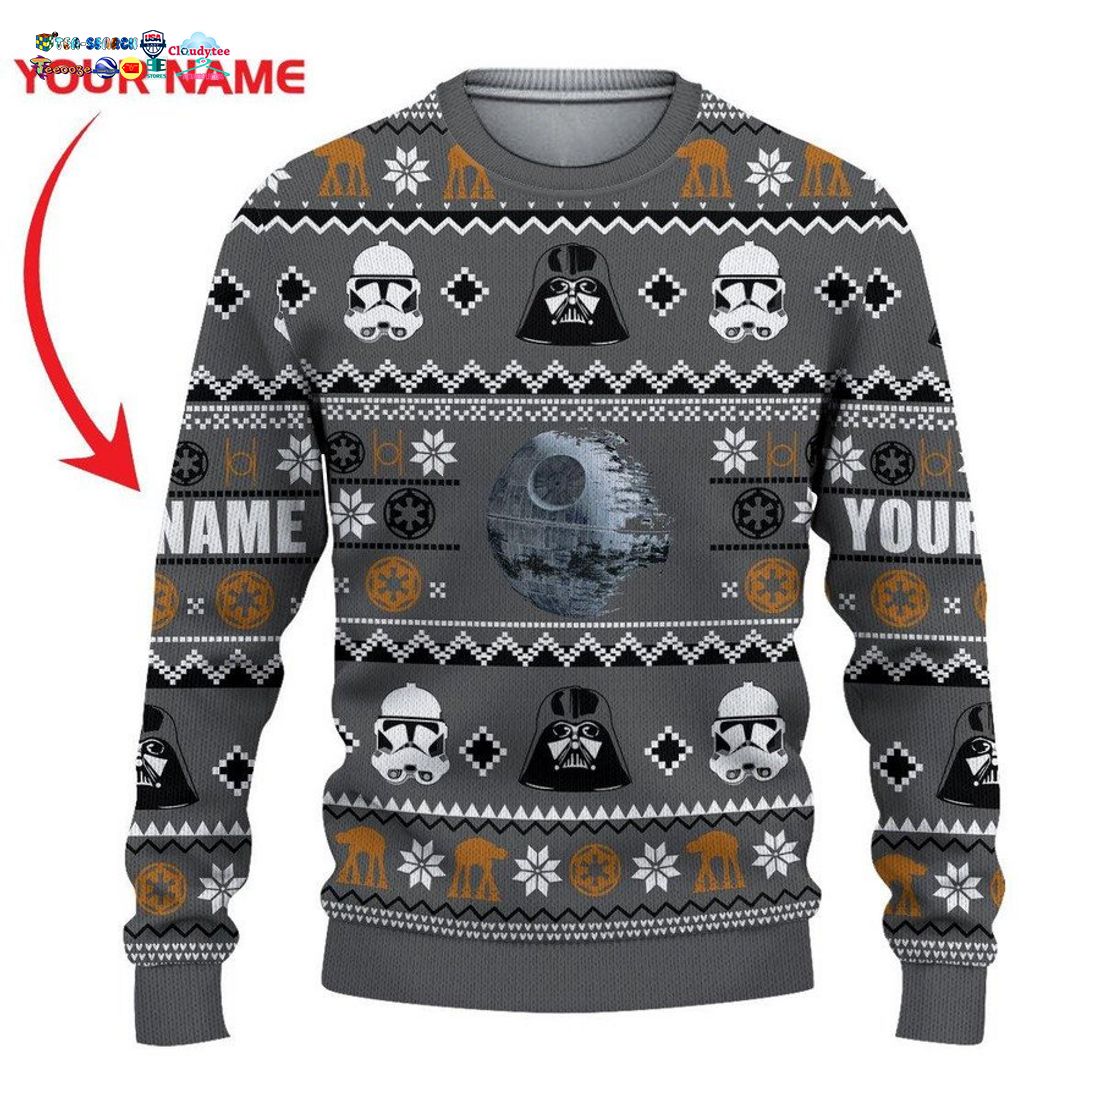 Personalized Name Darth Vader Stormtrooper Ugly Christmas Sweater